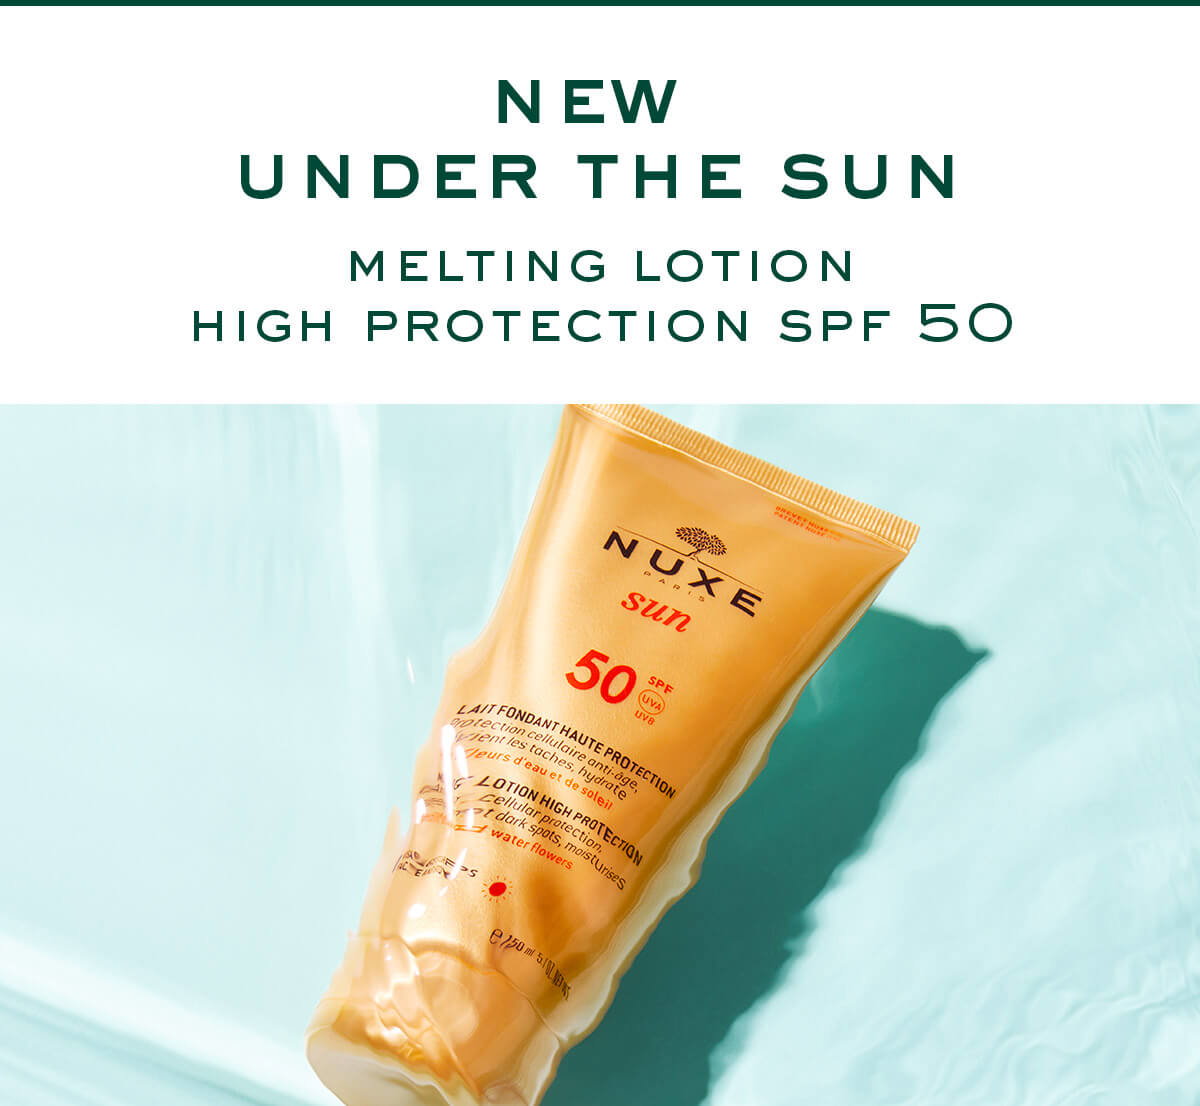 NUXE SUN Melting Lotion High Protection SPF 50 - Face & Body, 150